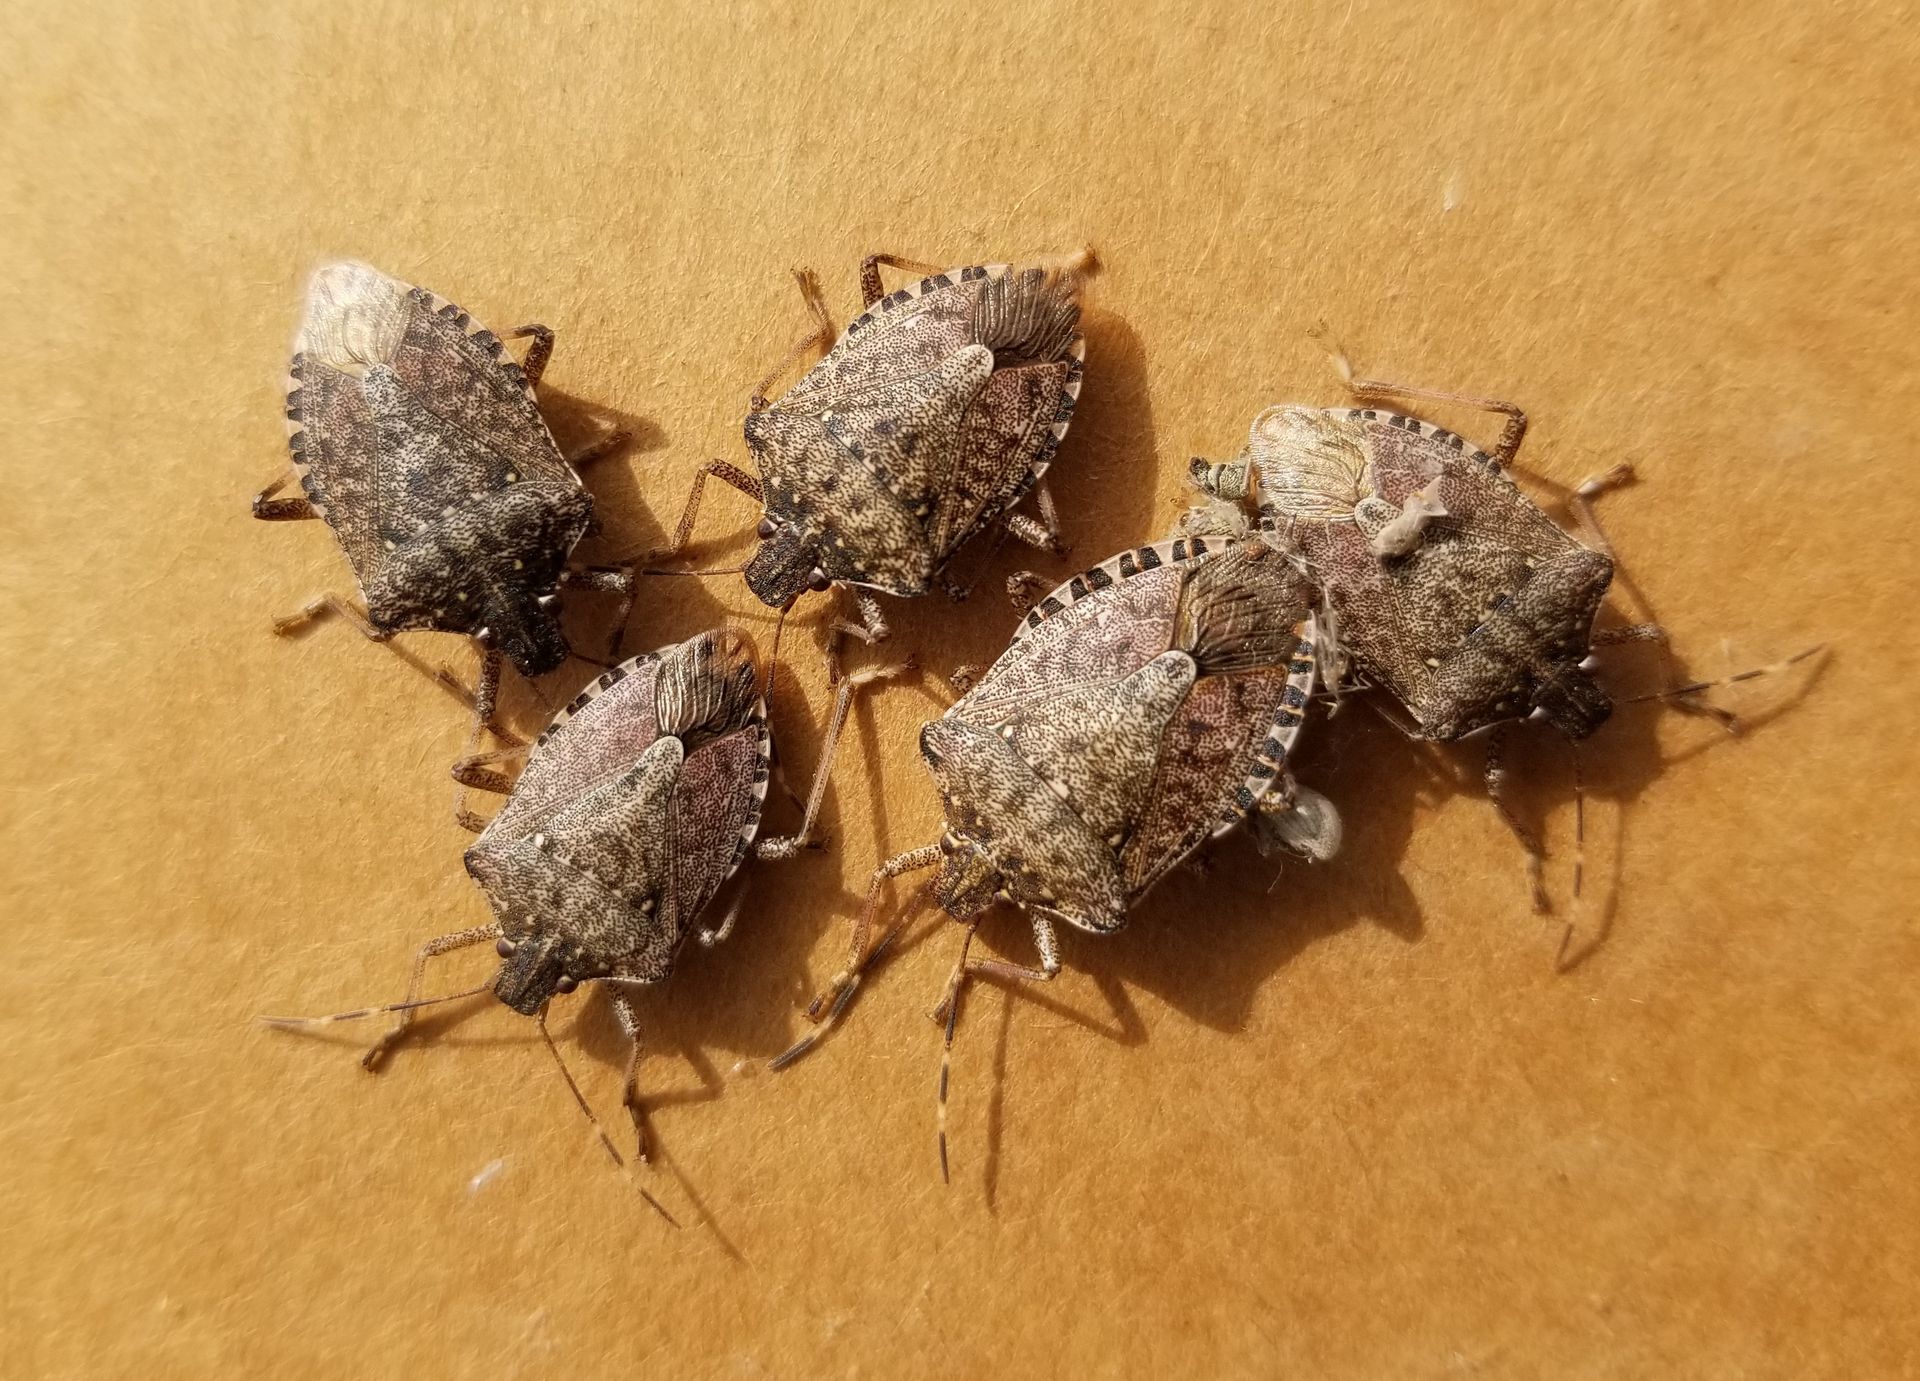 image of a group of stink bugs